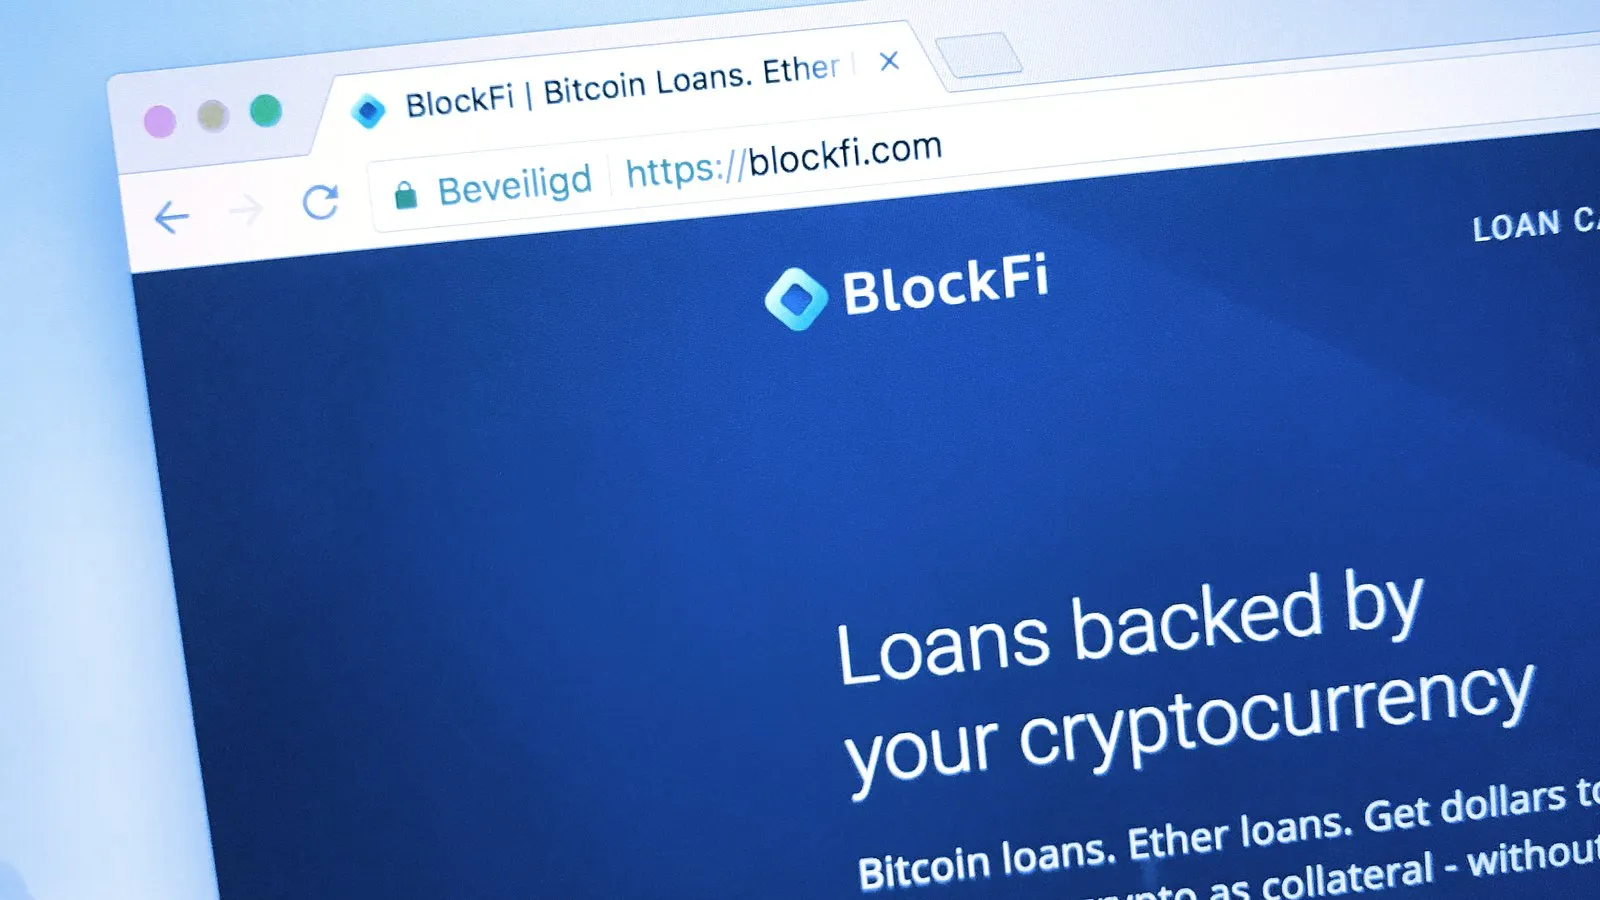 Website of BlockFi, a lending platform that provides loans using your cryptocurrency. Image: Shutterstock